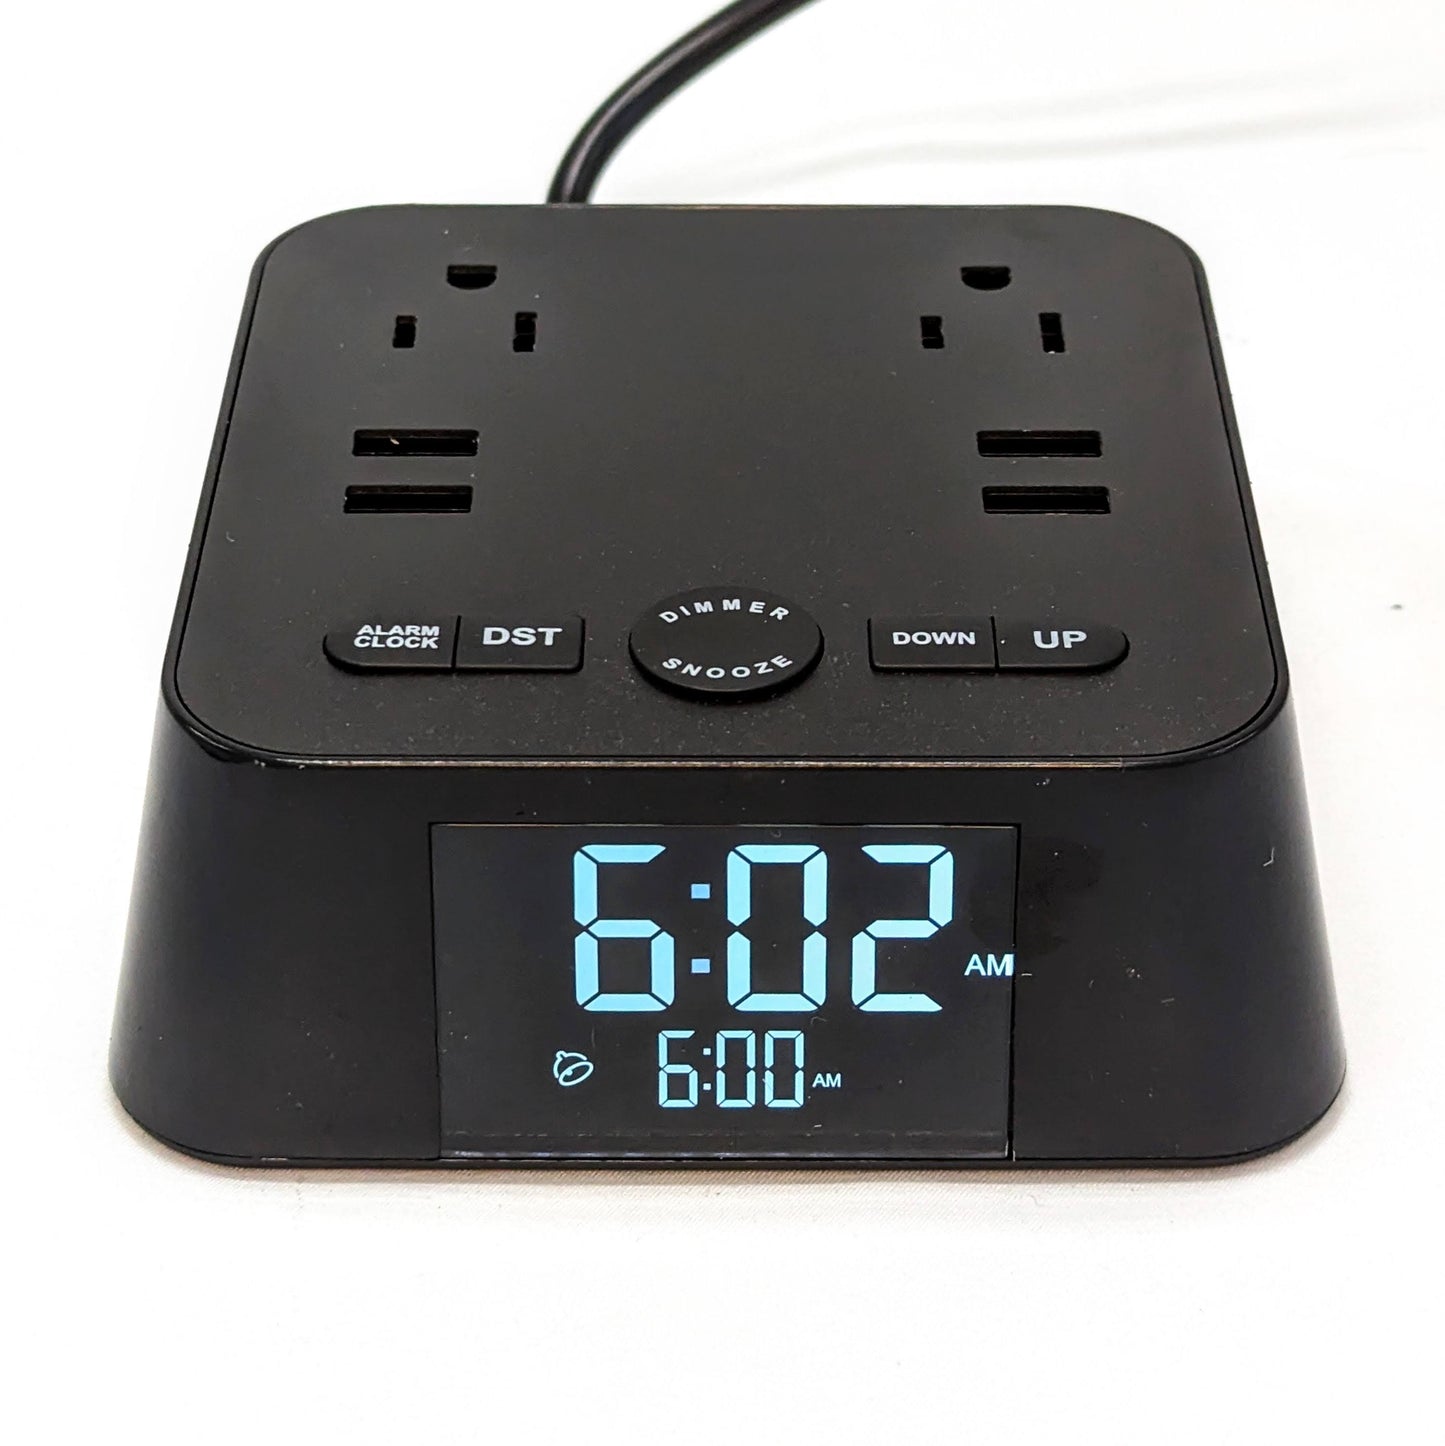 Power Hub Ultra Clock without cover - an attractive, sleek modern look.  A charging and power hub that fits the bill for hotels, vacation rentals and general home use.